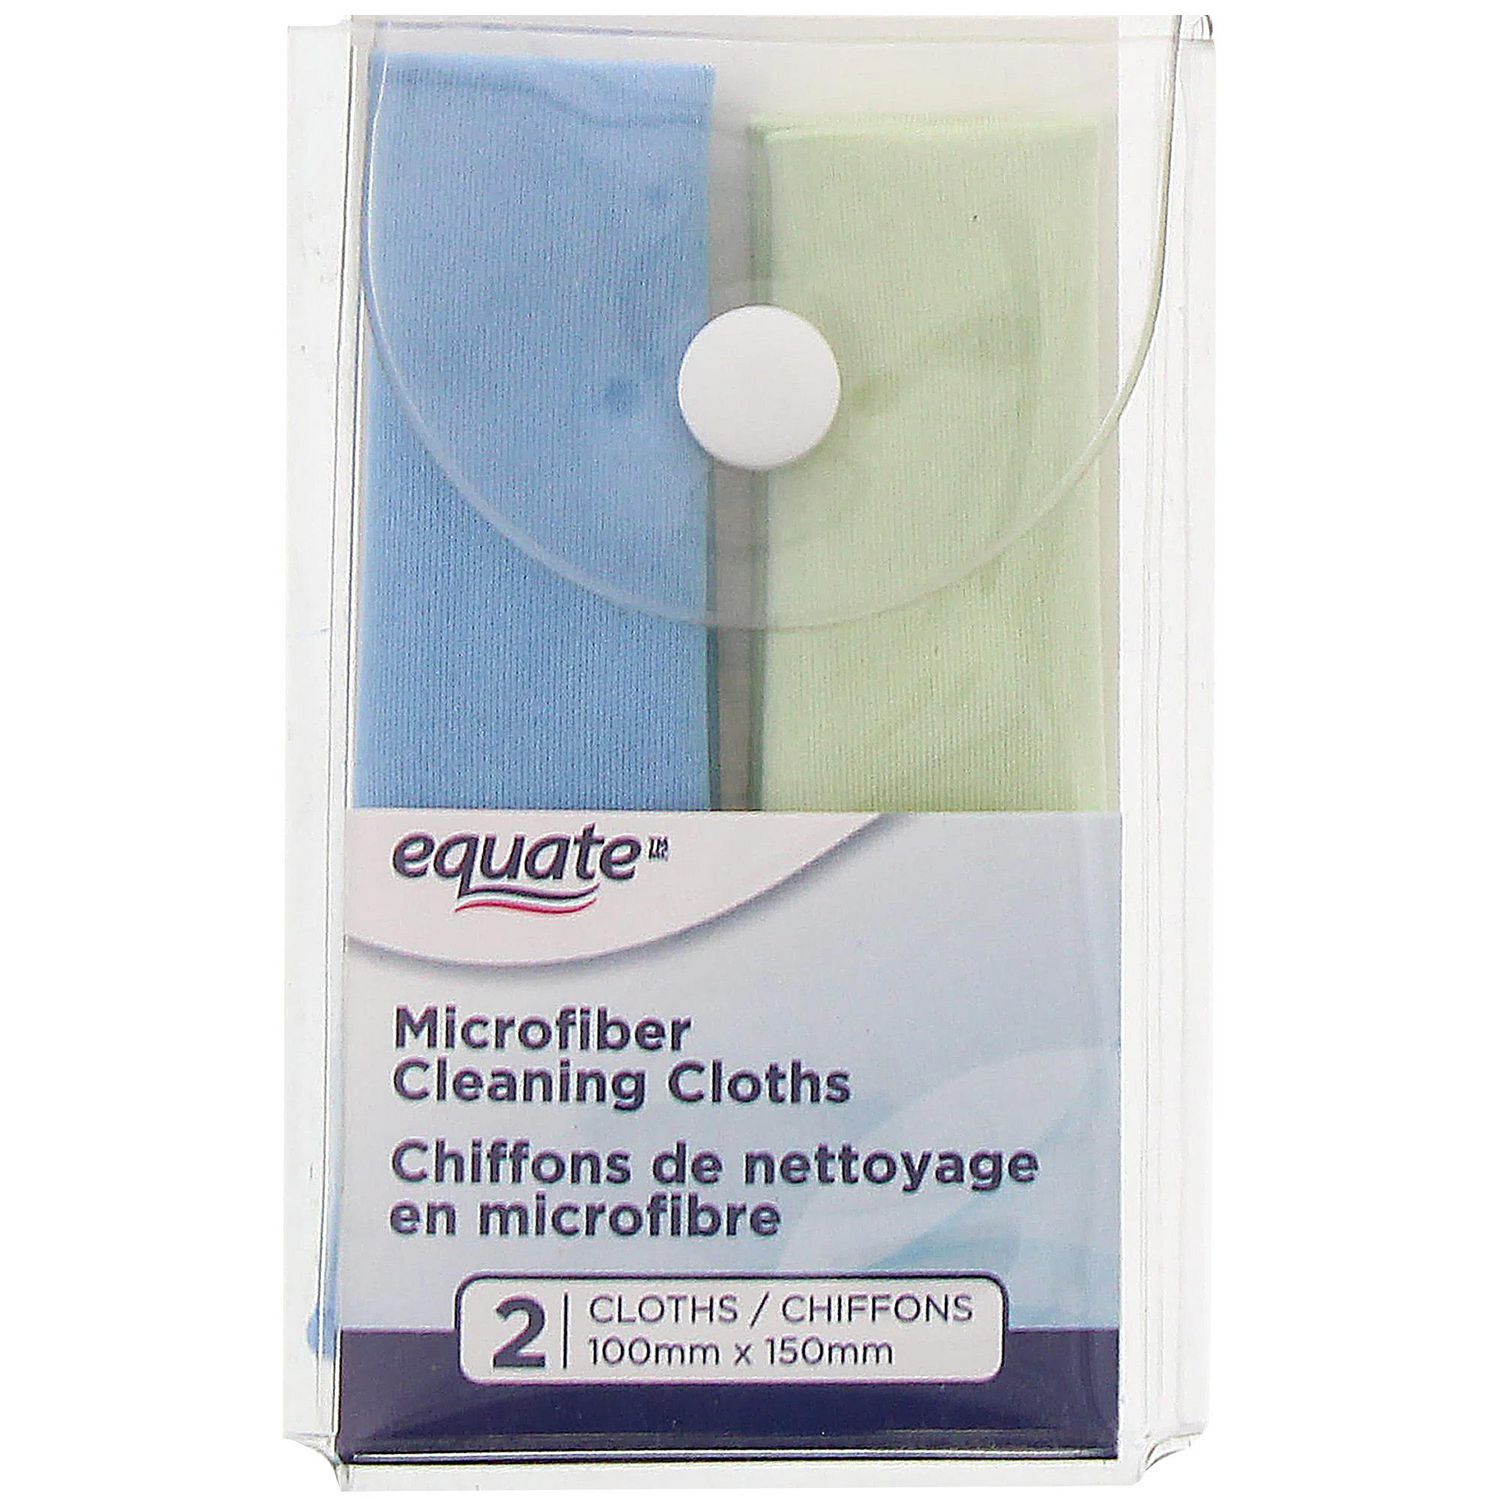 Equate Microfiber Cleaning Cloths, Equate Eyeglass Cleaner Cloths 